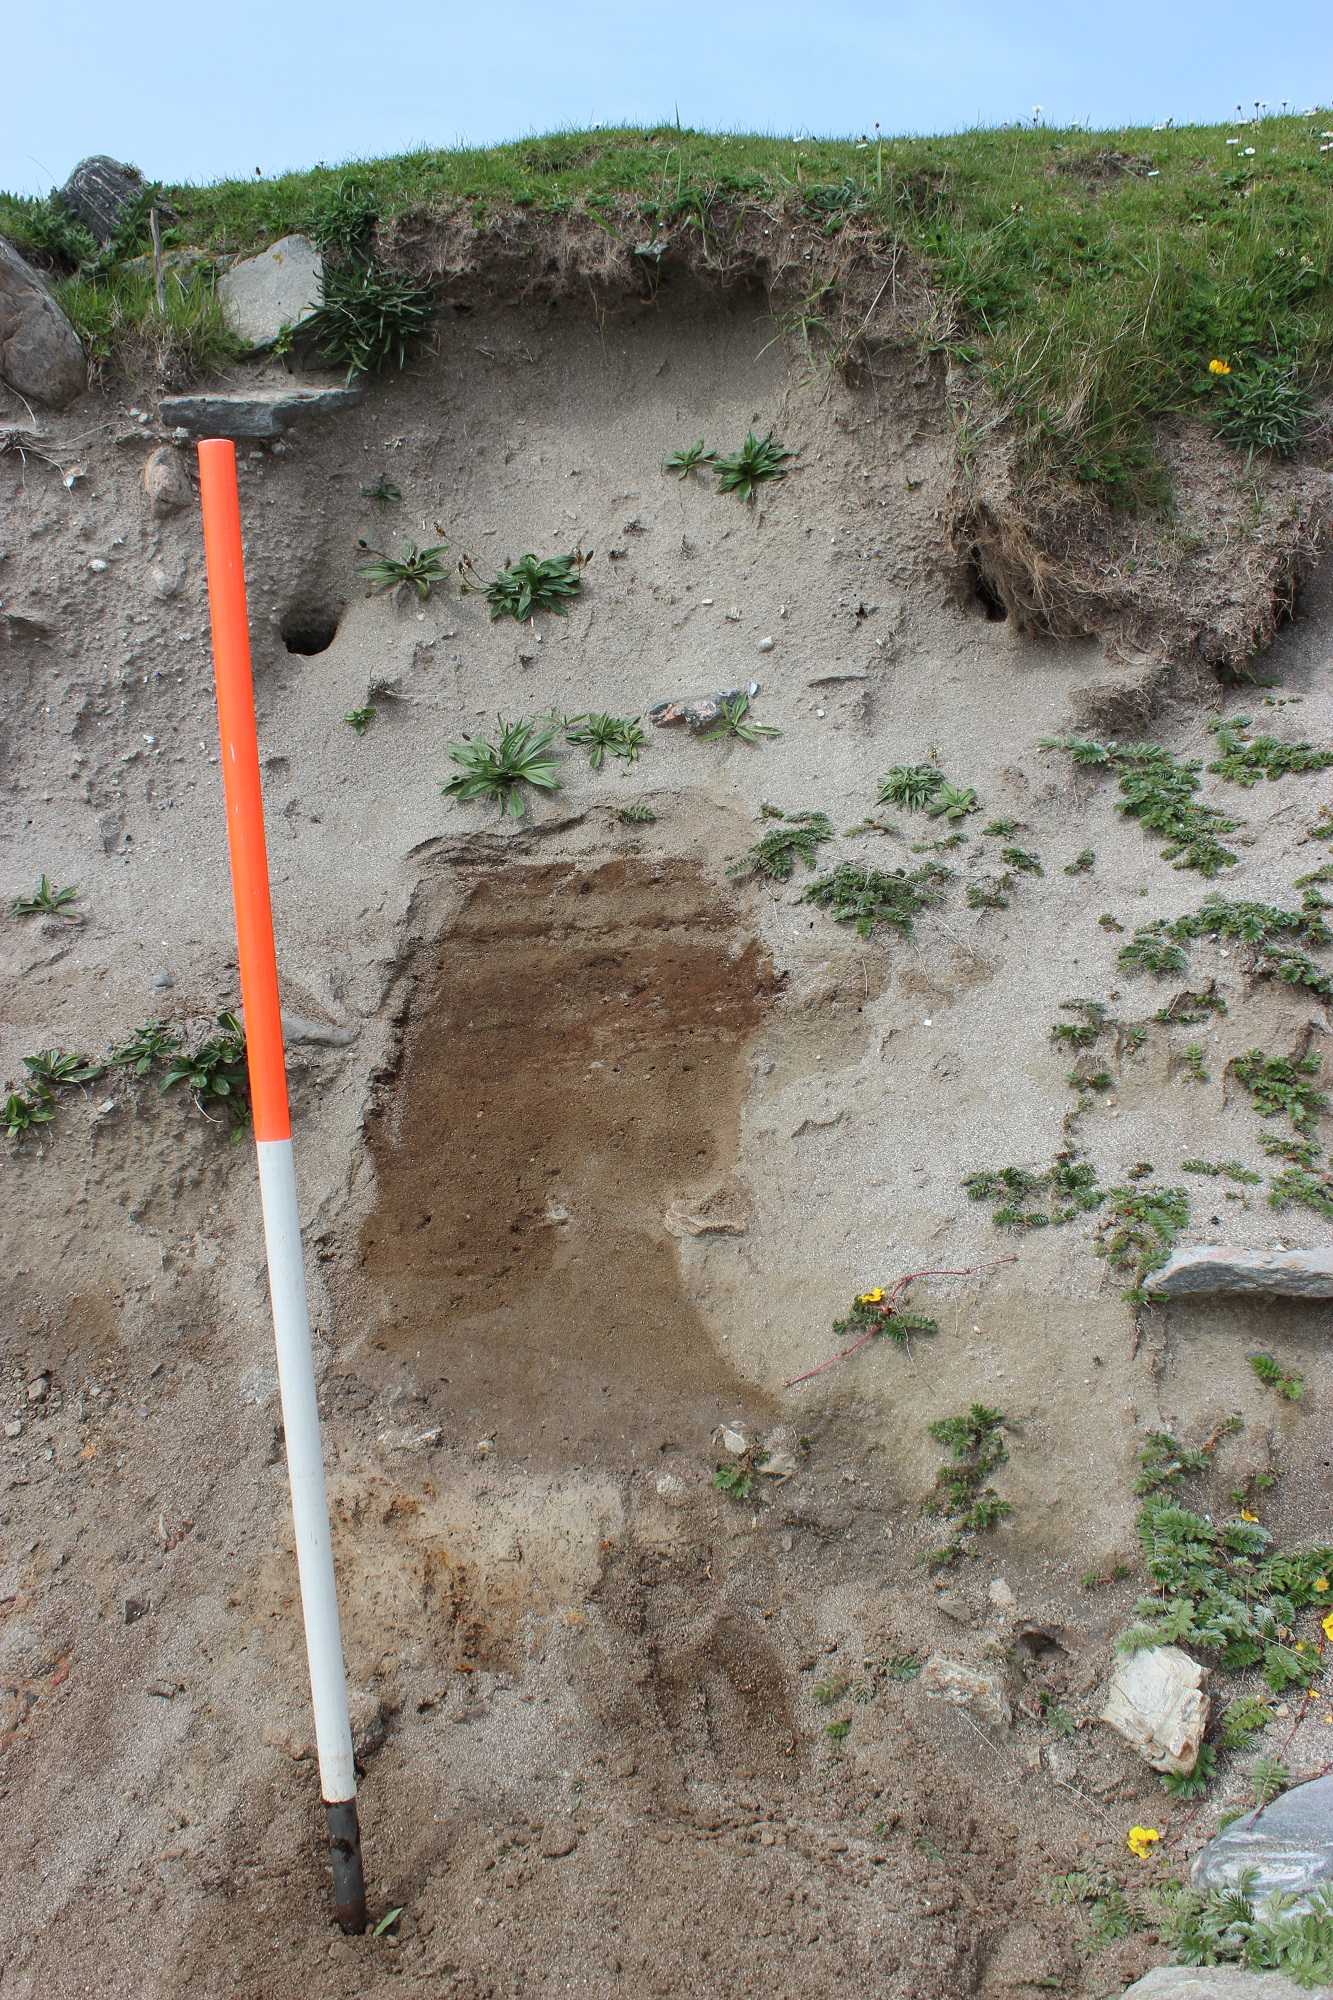 Showing 'floor' deposits inside structure overlain with blown sand